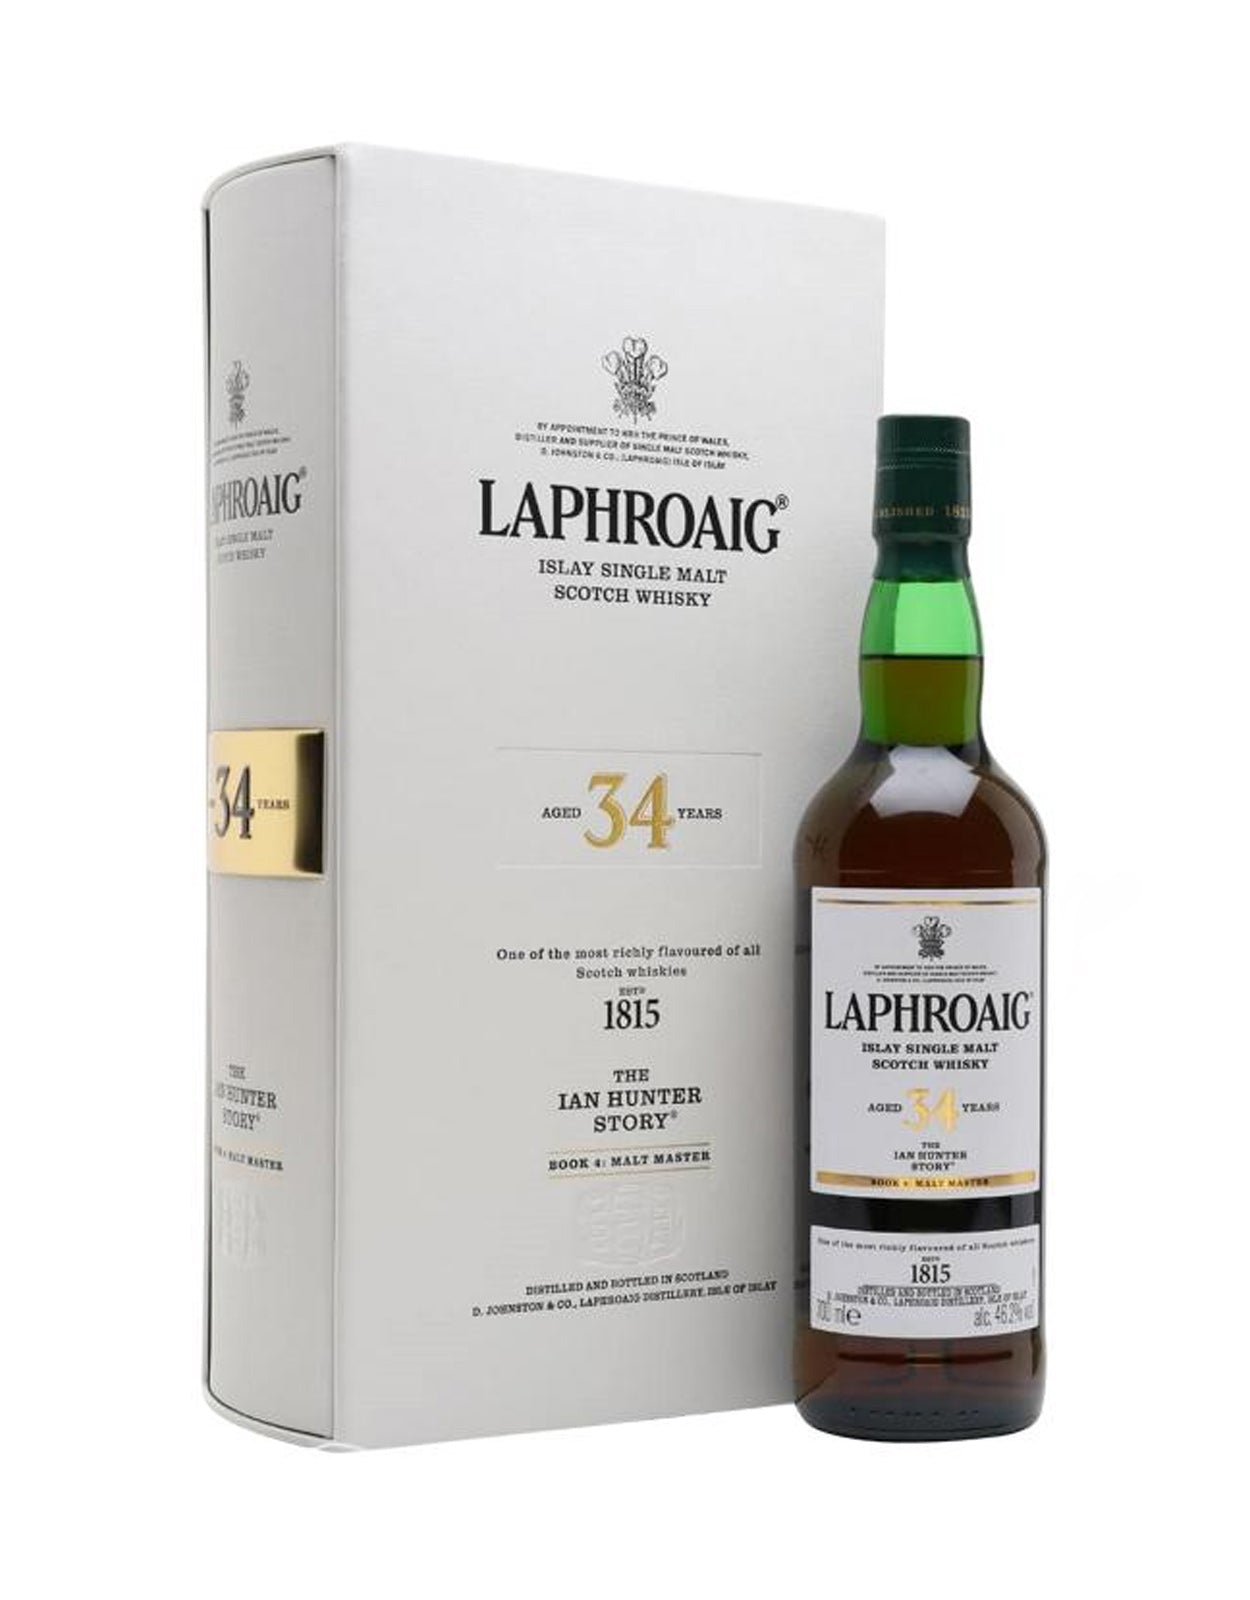 Laphroaig 34 Year Old 'The Ian Hunter Story' - Book 4